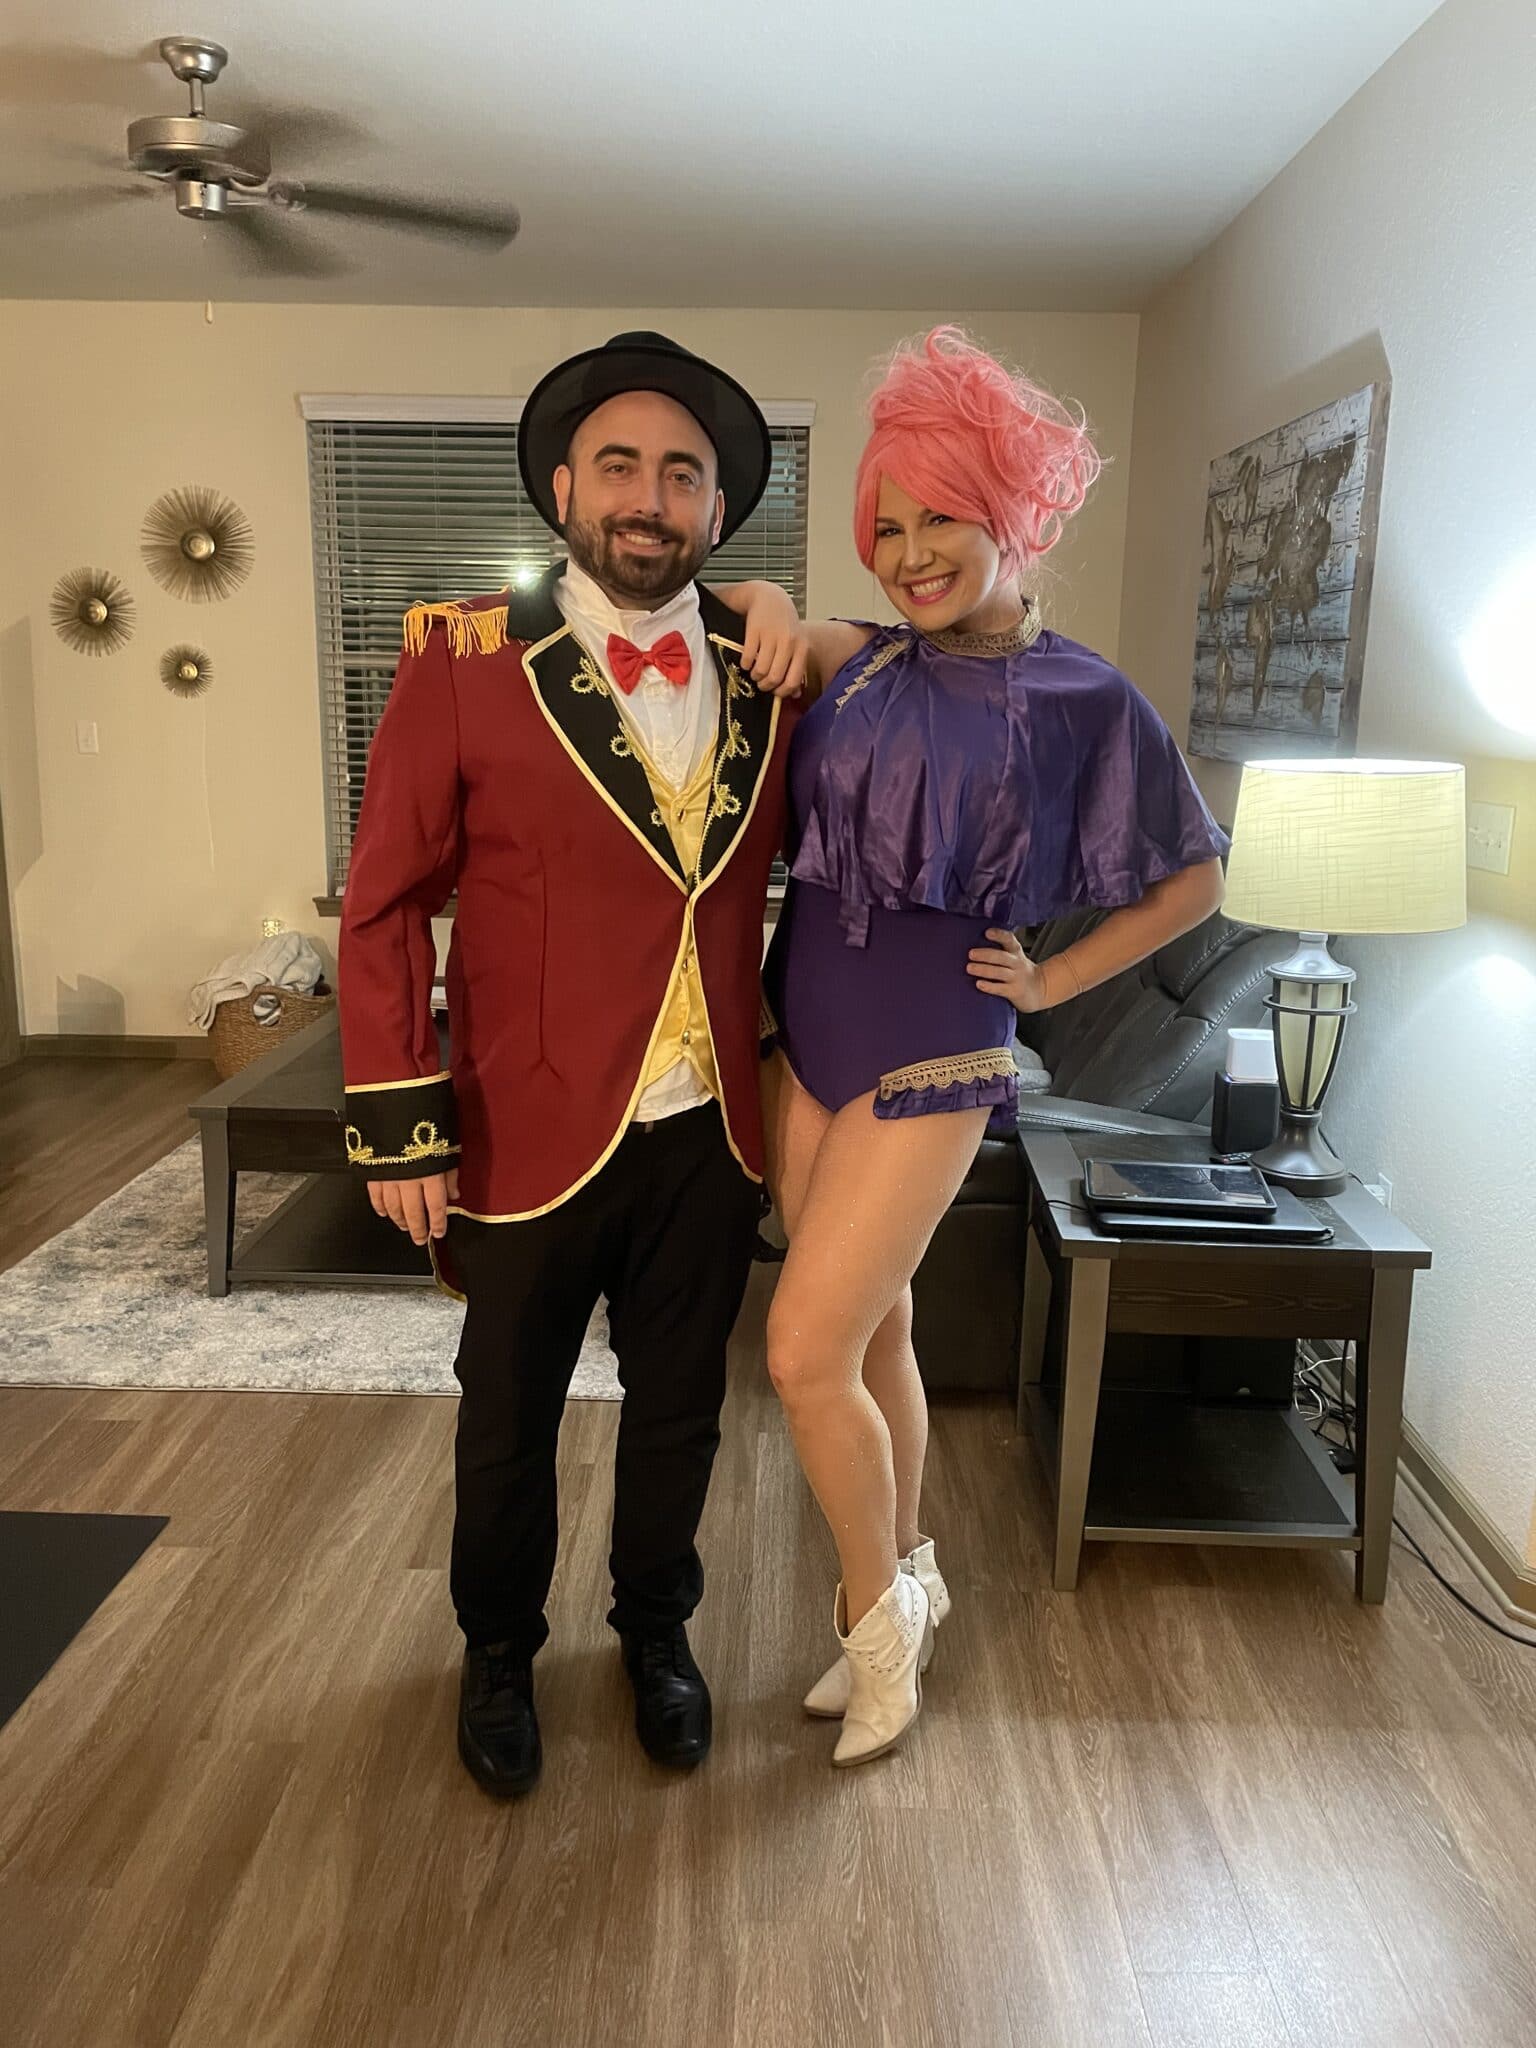 couple dressing up for a party